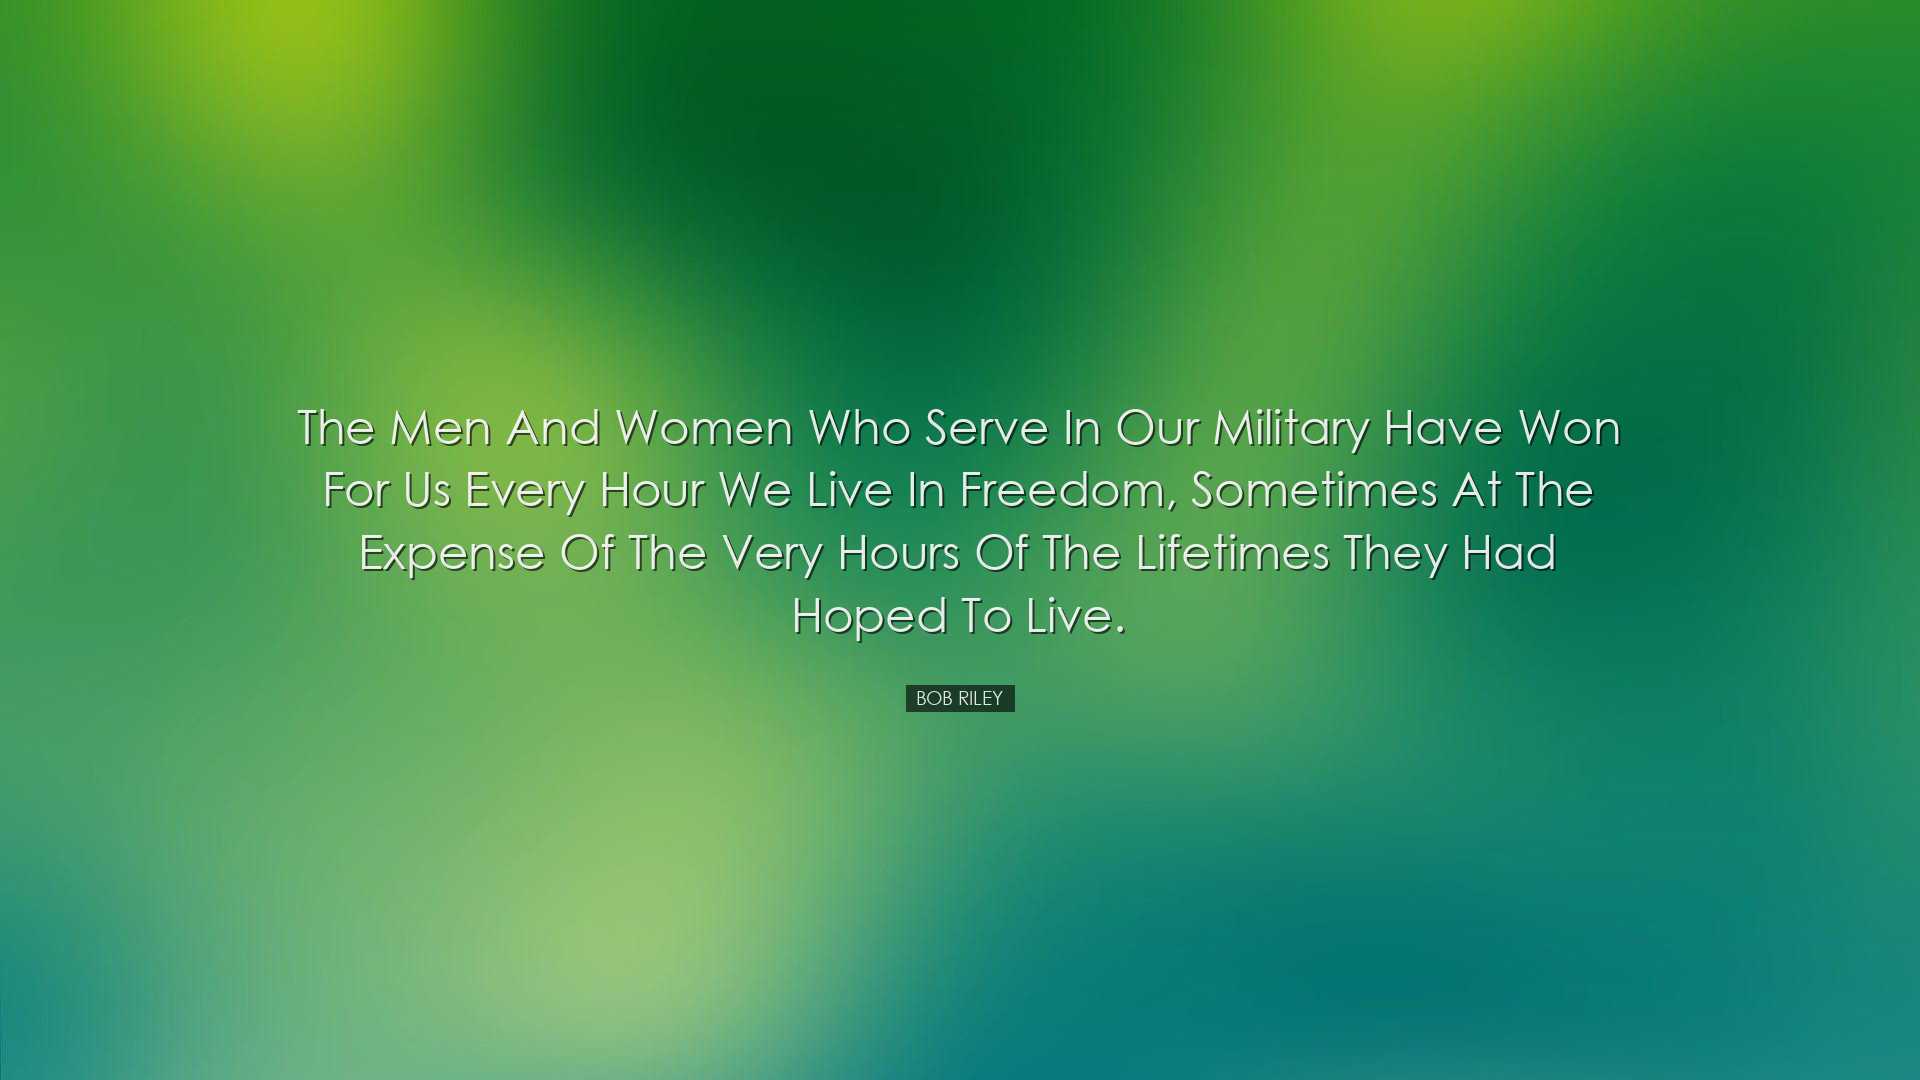 The men and women who serve in our military have won for us every